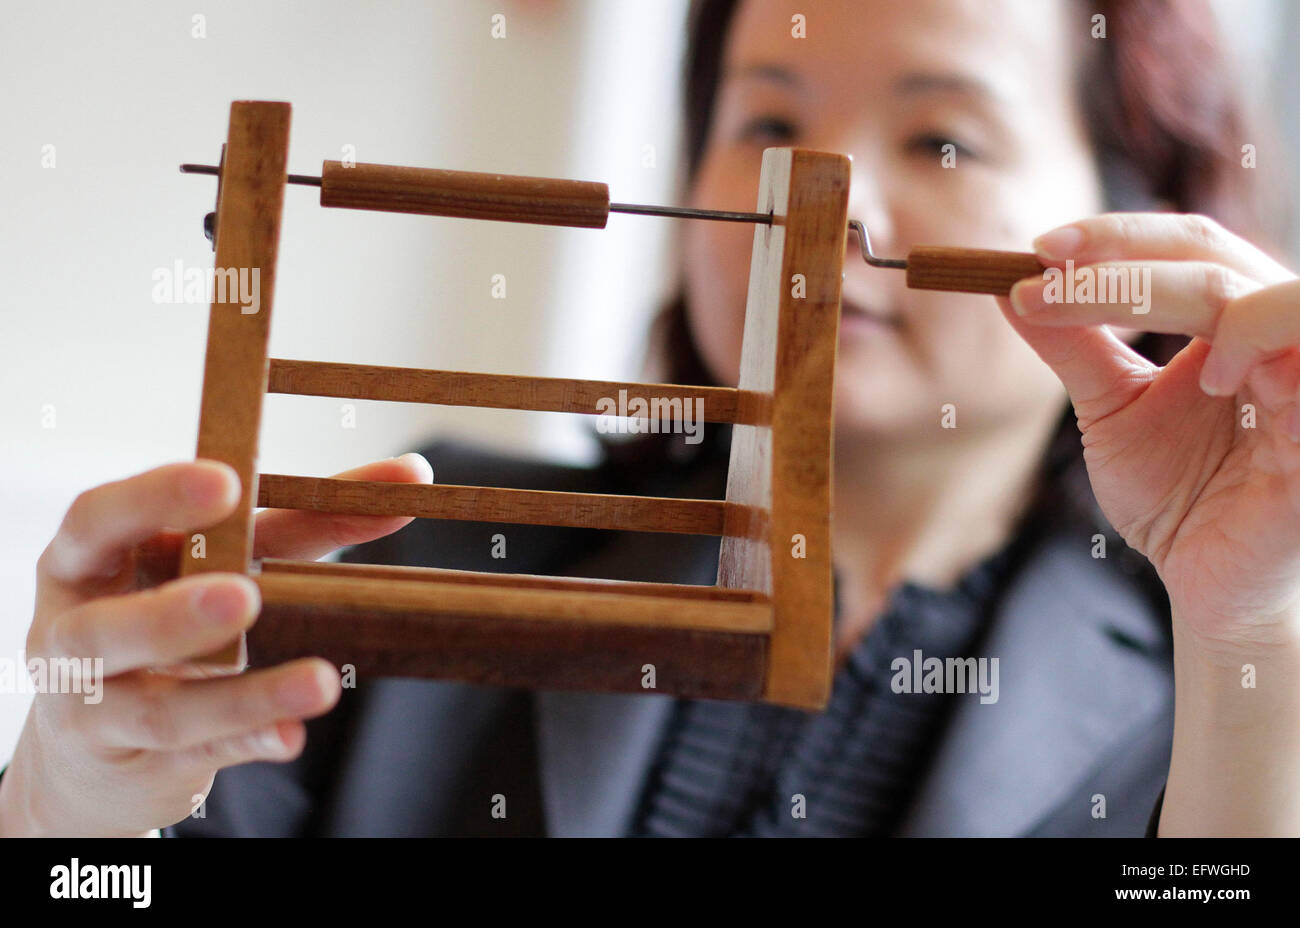 (150211) -- VANCOUVER, Feb. 11, 2015 (Xinhua) -- A nursing school alumni displays a wooden bandage roller during the nursing school celebration event at University of British Columbia in Richmond, Canada, Feb. 10, 2015. In honour of the Canadian nursing pioneer Ethel Johns (1879-1968) named as National Historic Person of Canada, the School of Nursing in University of British Columbia held an event displaying the former nursing uniforms and historic nursing tools during the World War I to commemorate her contribution. Ethel Johns established the first university degree nursing program in Canada Stock Photo